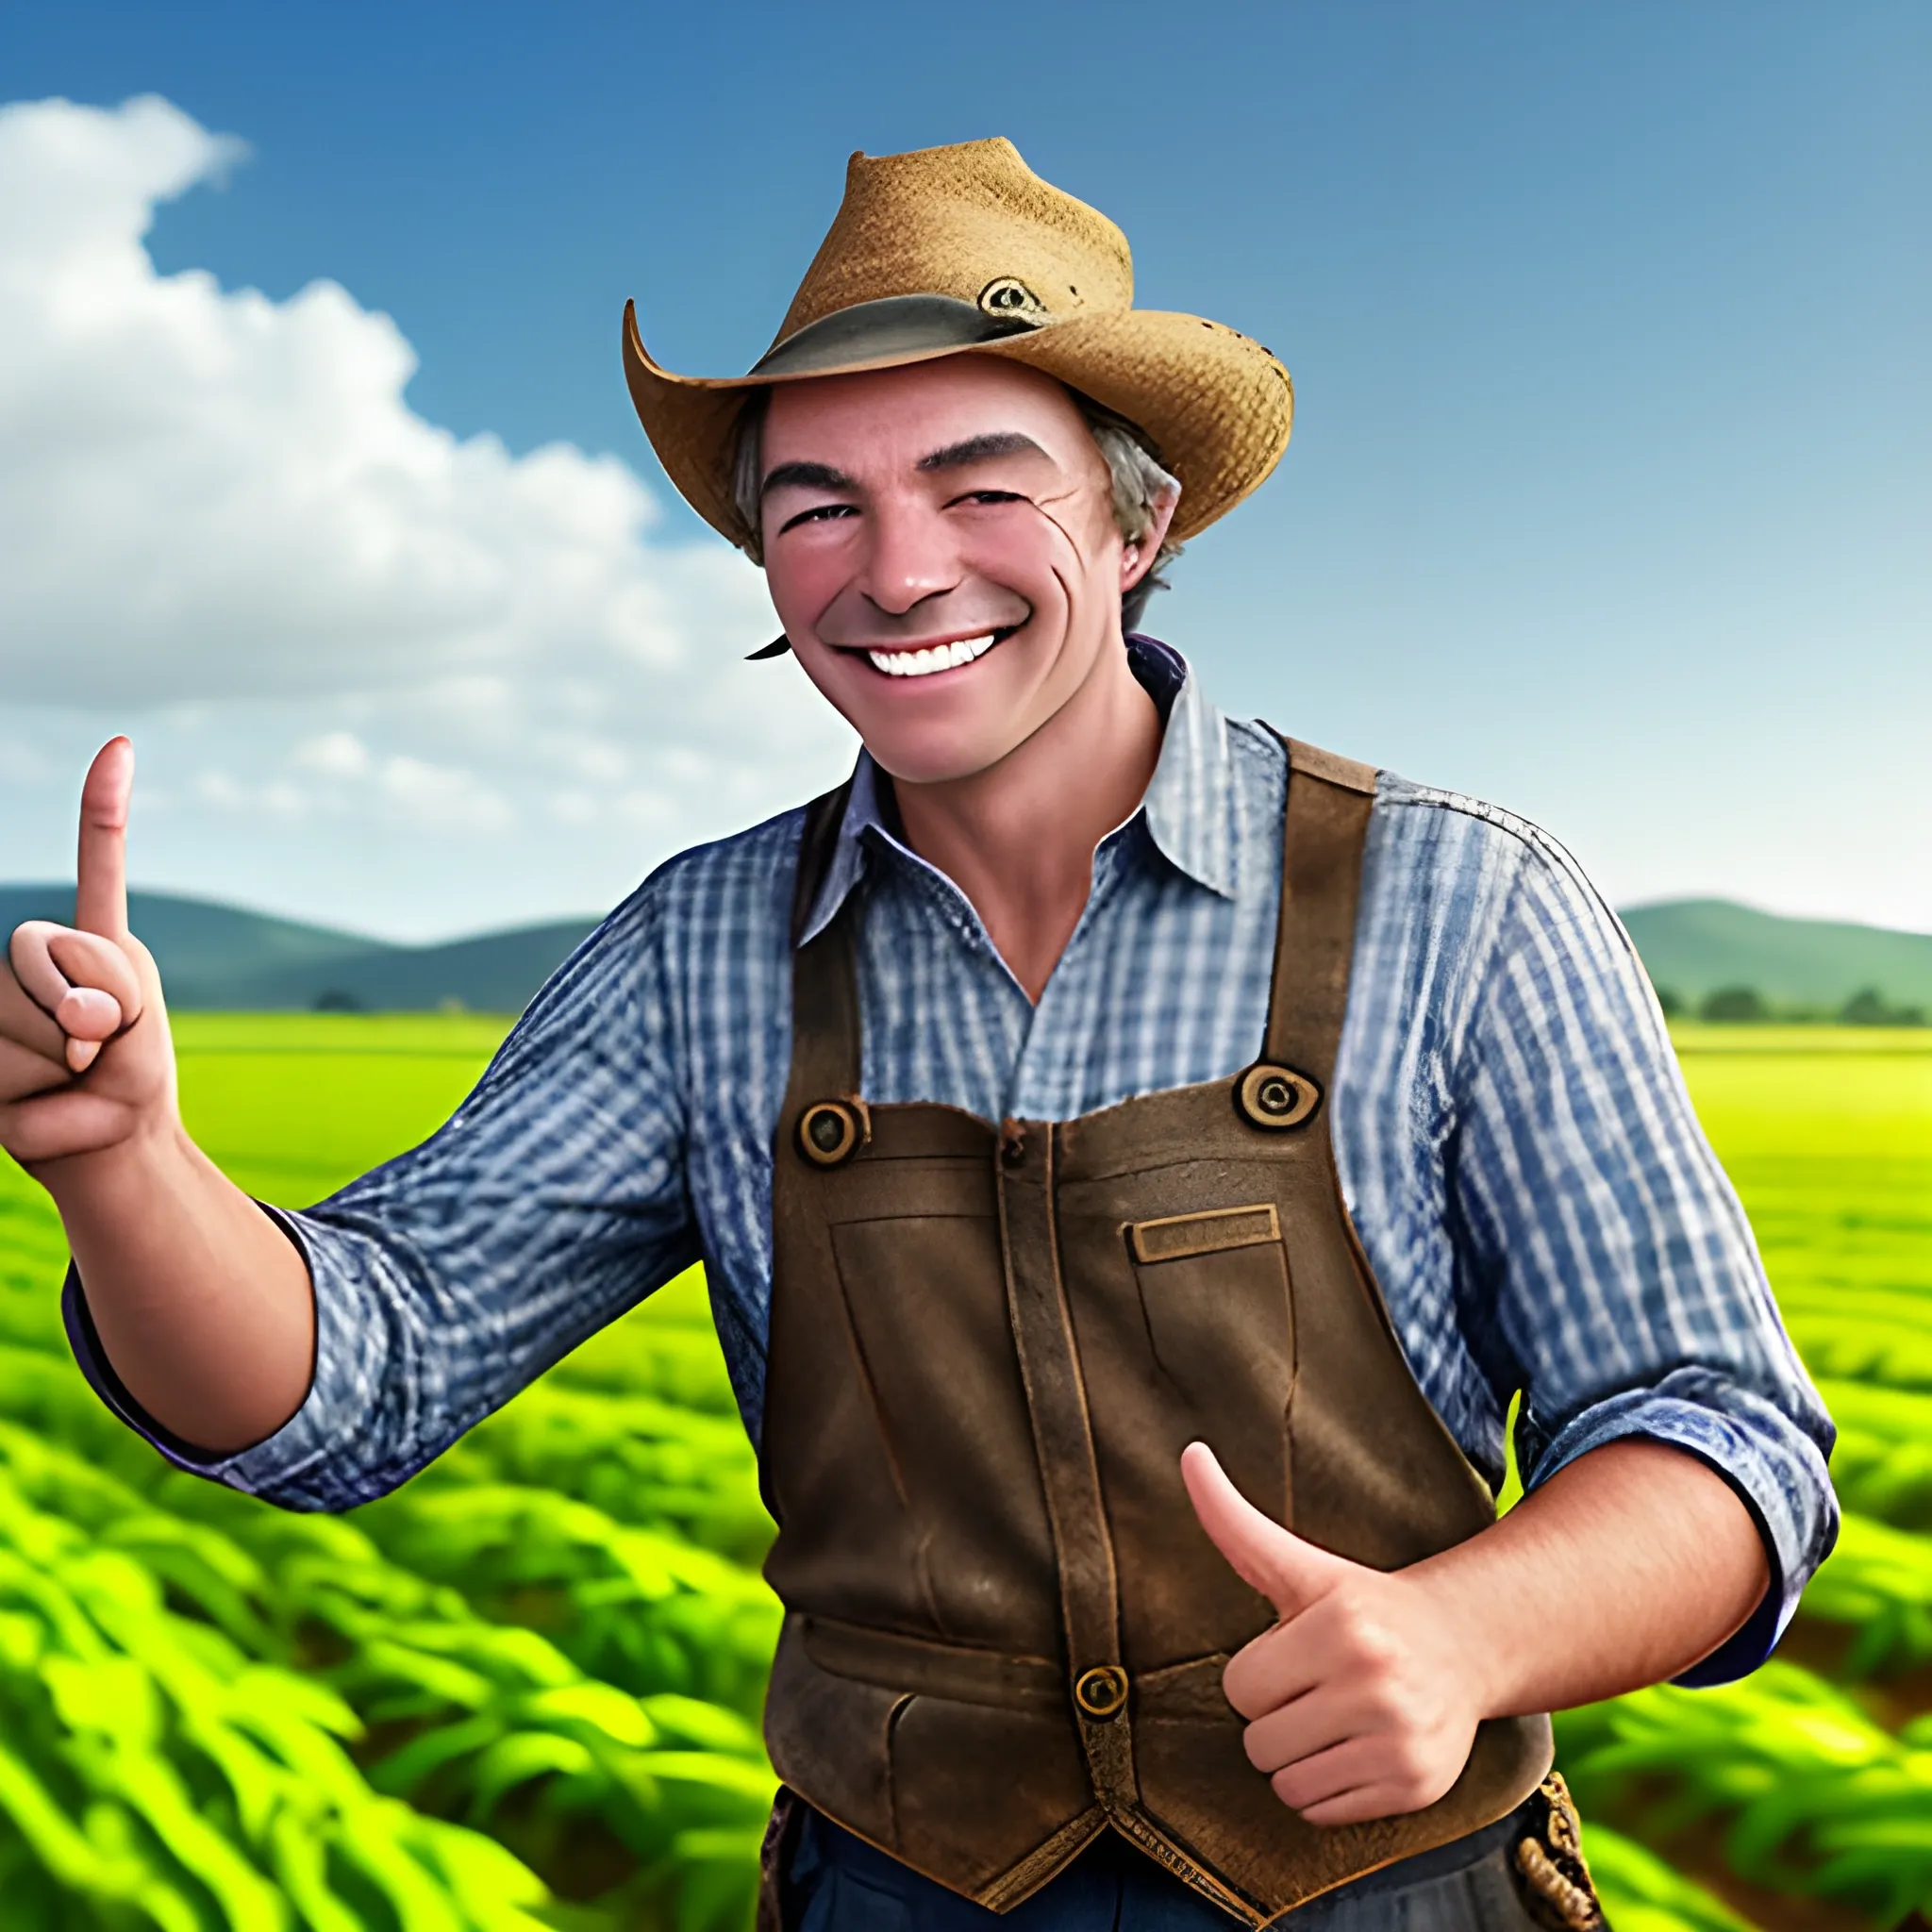 FANTASY, STABLE DIFFUSIÓN OF FARMER WINKING EYE SMILING AND POINTING WITH HIS FINGER